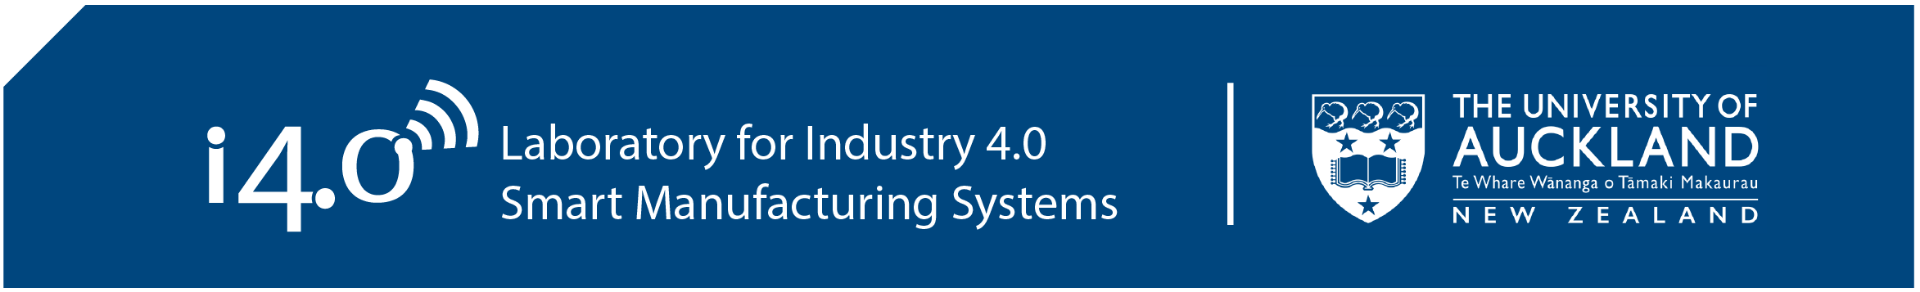 Laboratory for Industry 4.0 Smart Manufacturing Systems